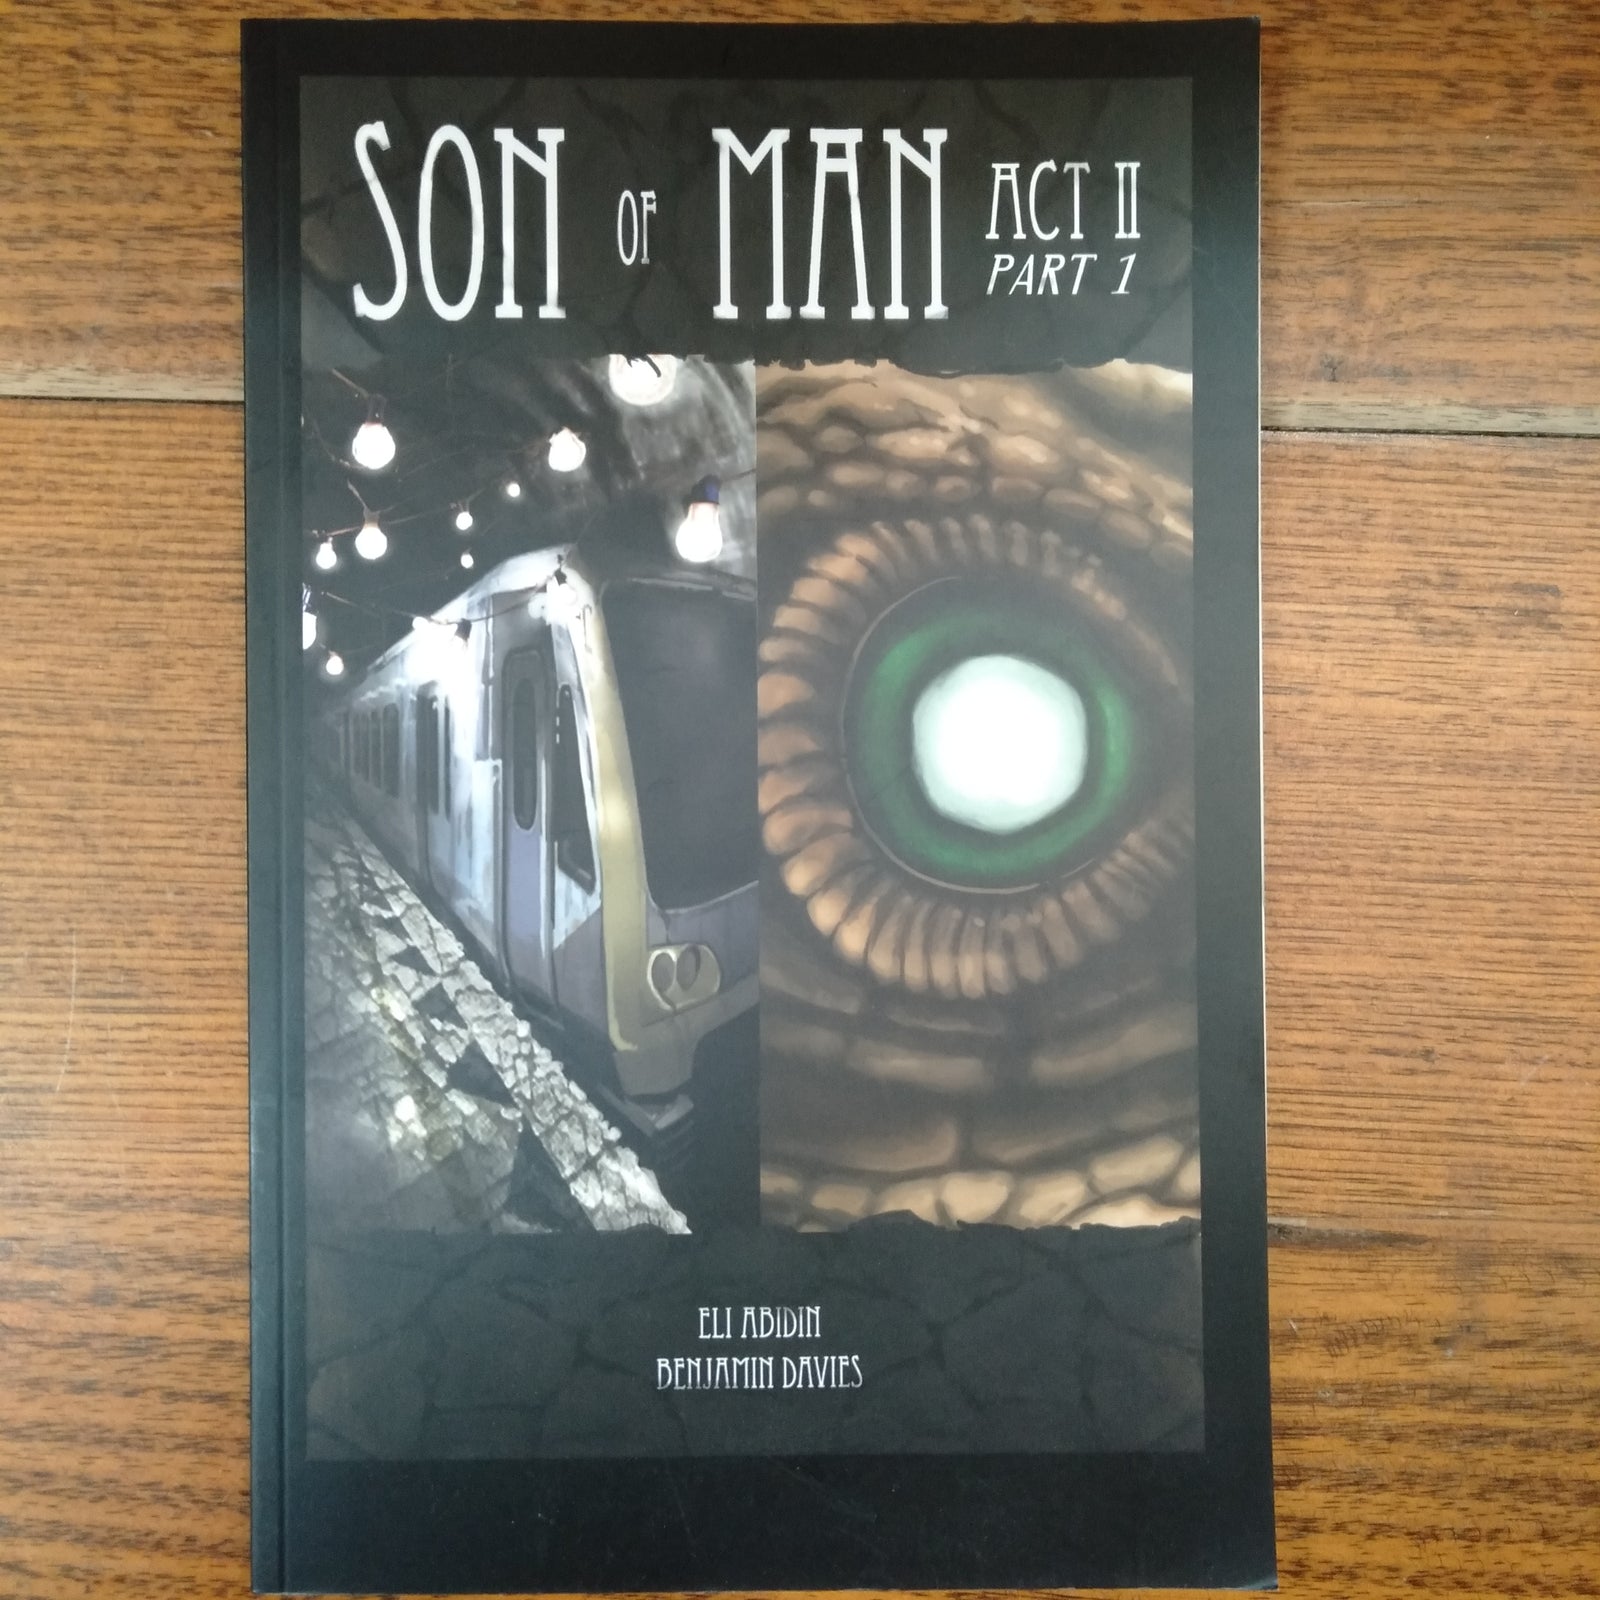 Son of Man - Act II Part 1